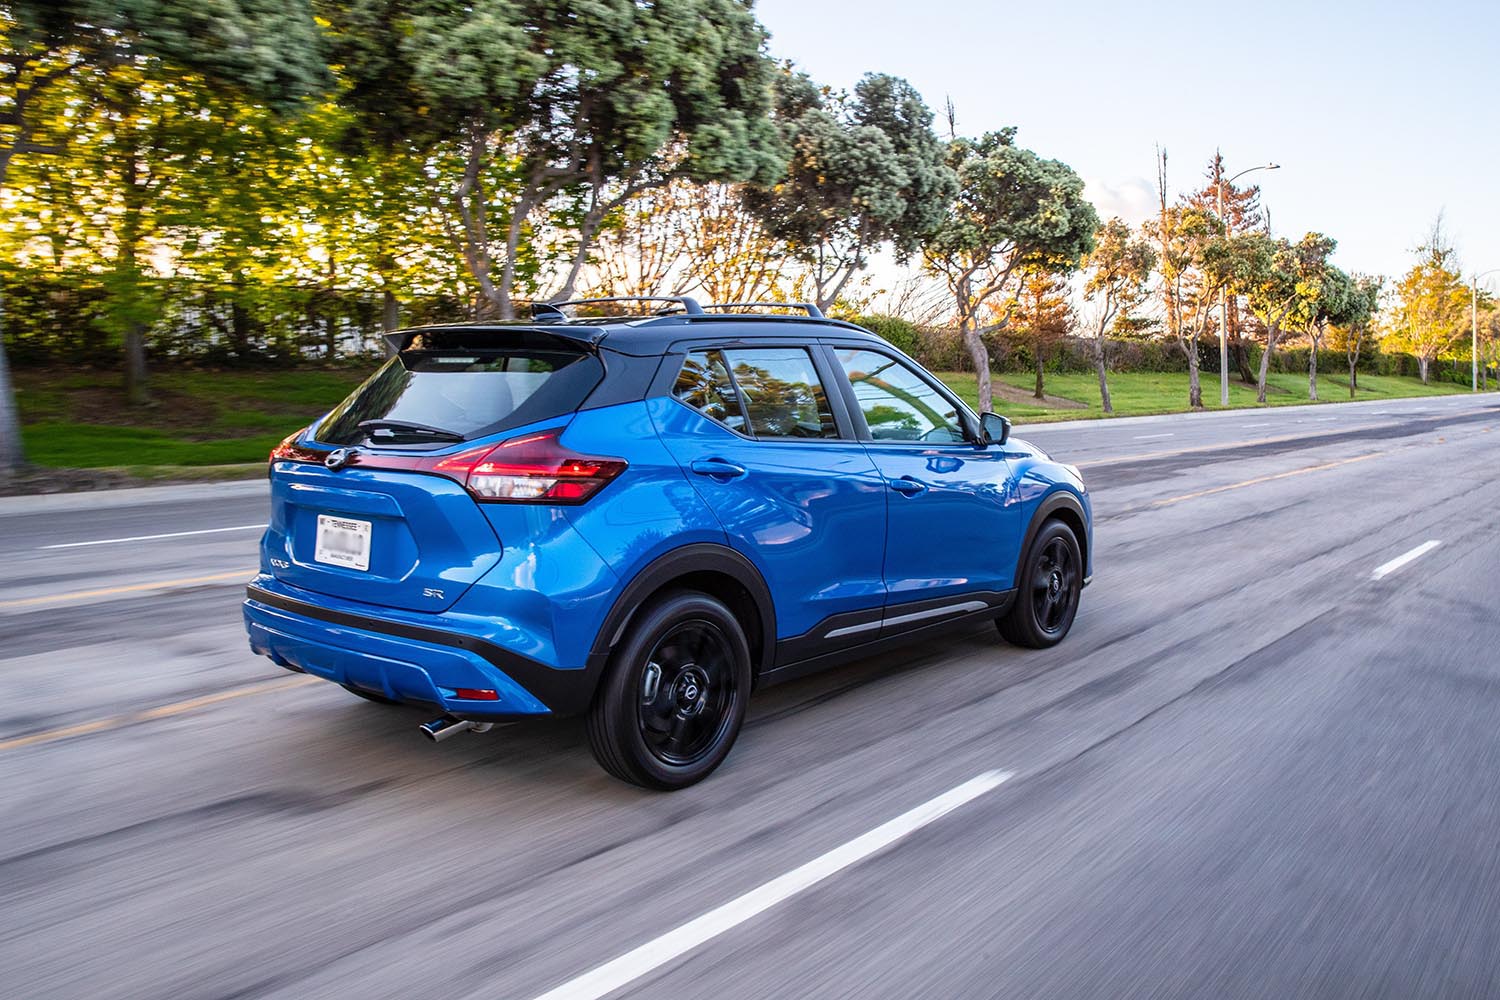 2023 Nissan Kicks in bright blue driving on a paved road beside trees.